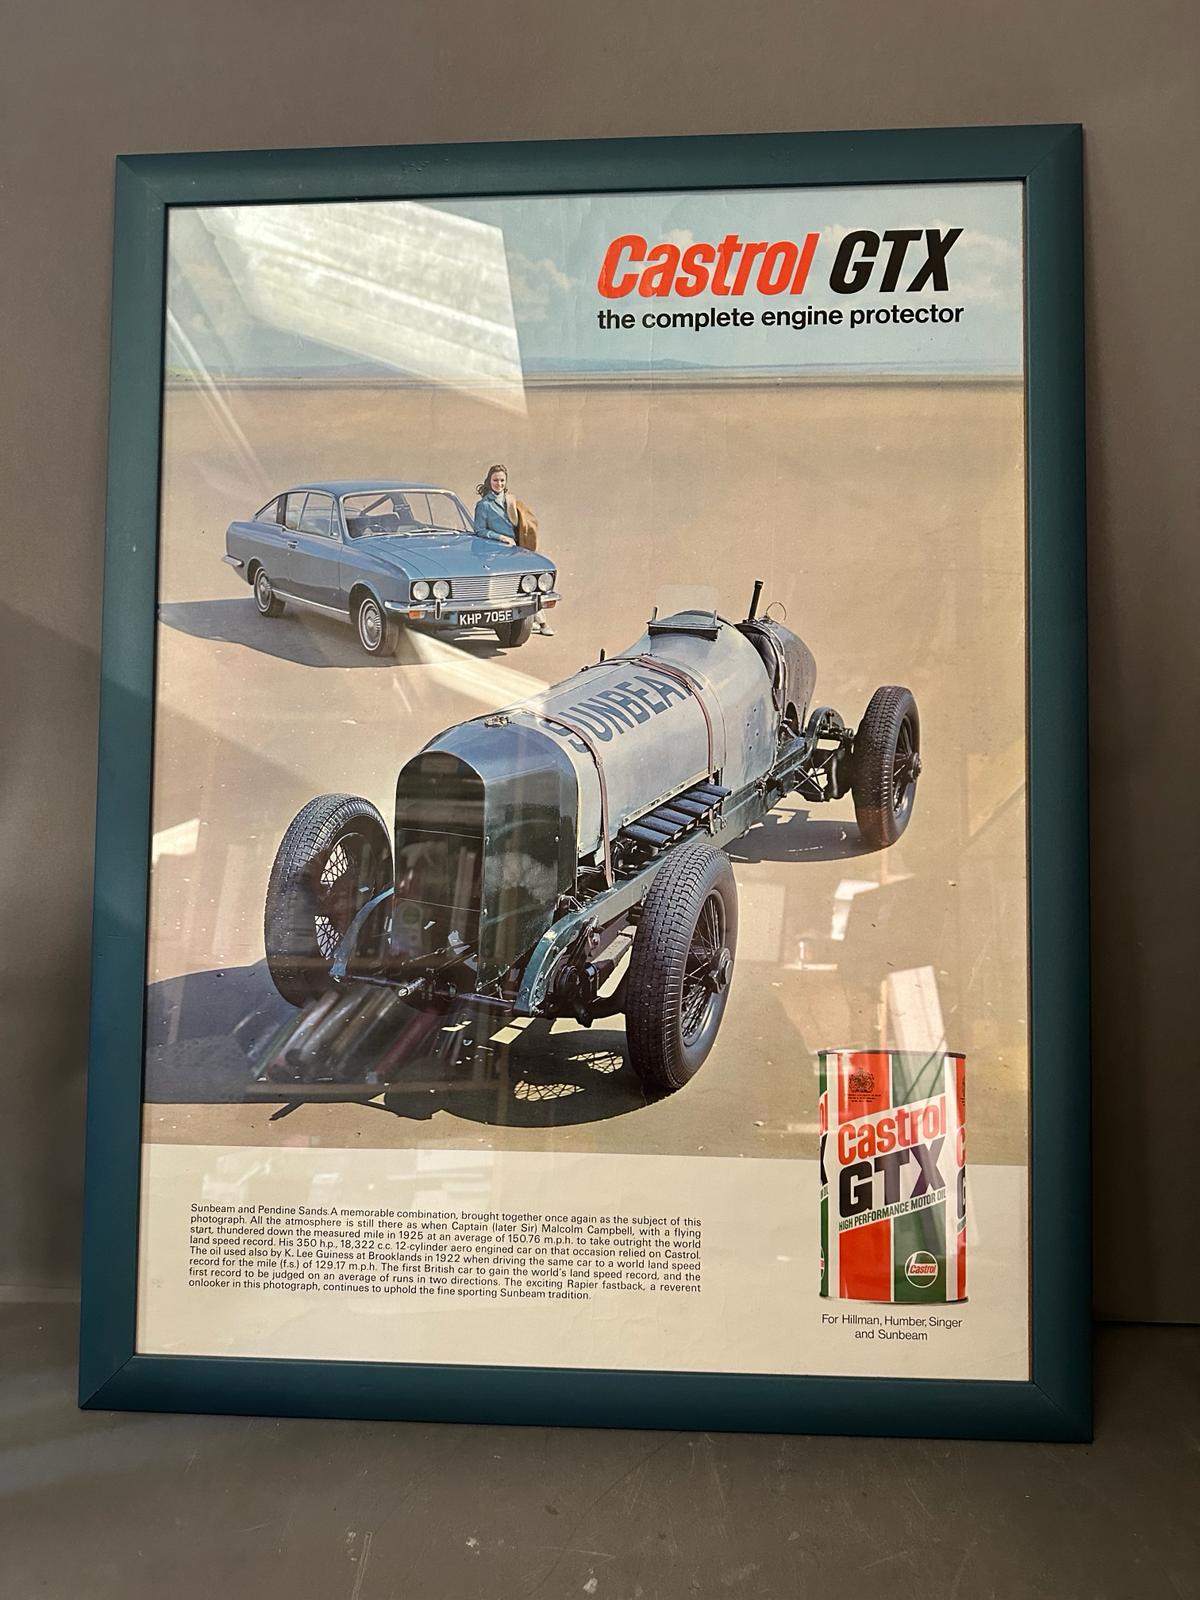 A vintage Castrol GTX The Complete Engine Protector poster featuring a Sunbeam and a Peudine Sands